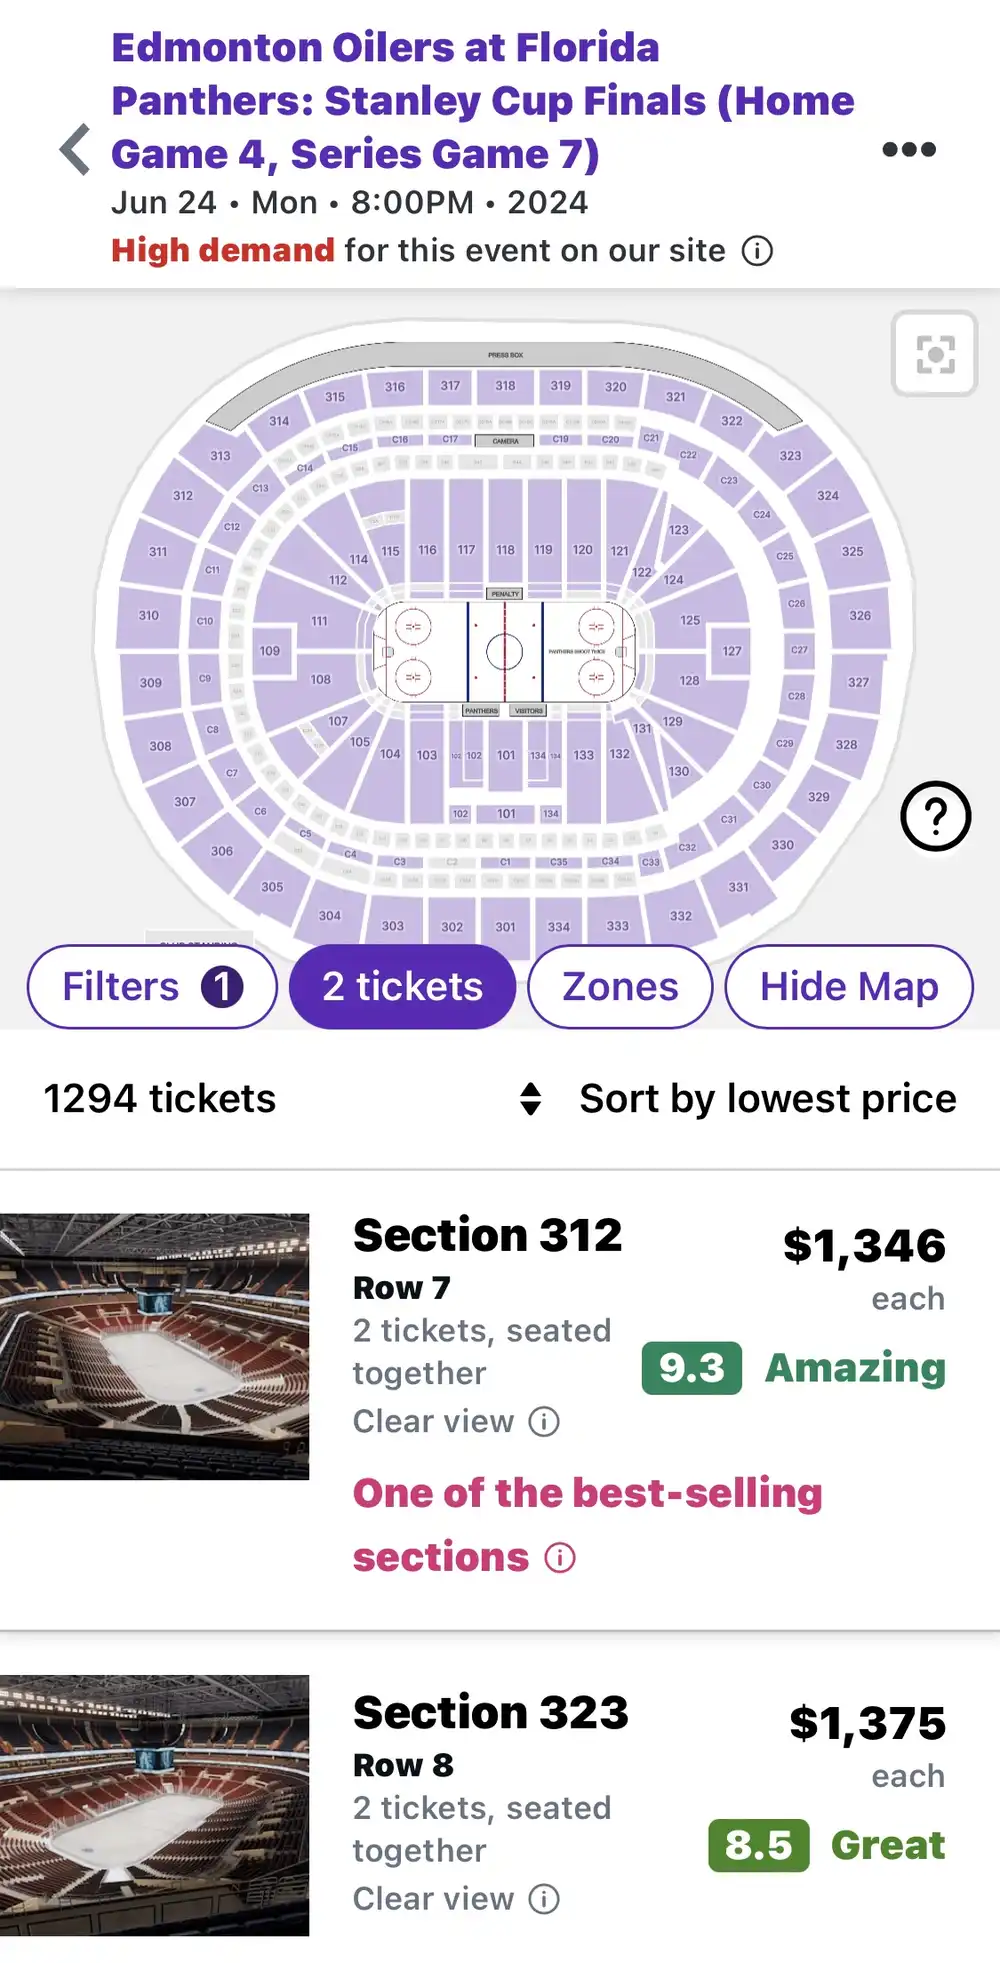 stanley cup game 7 edmton oilers florida panthers tickets